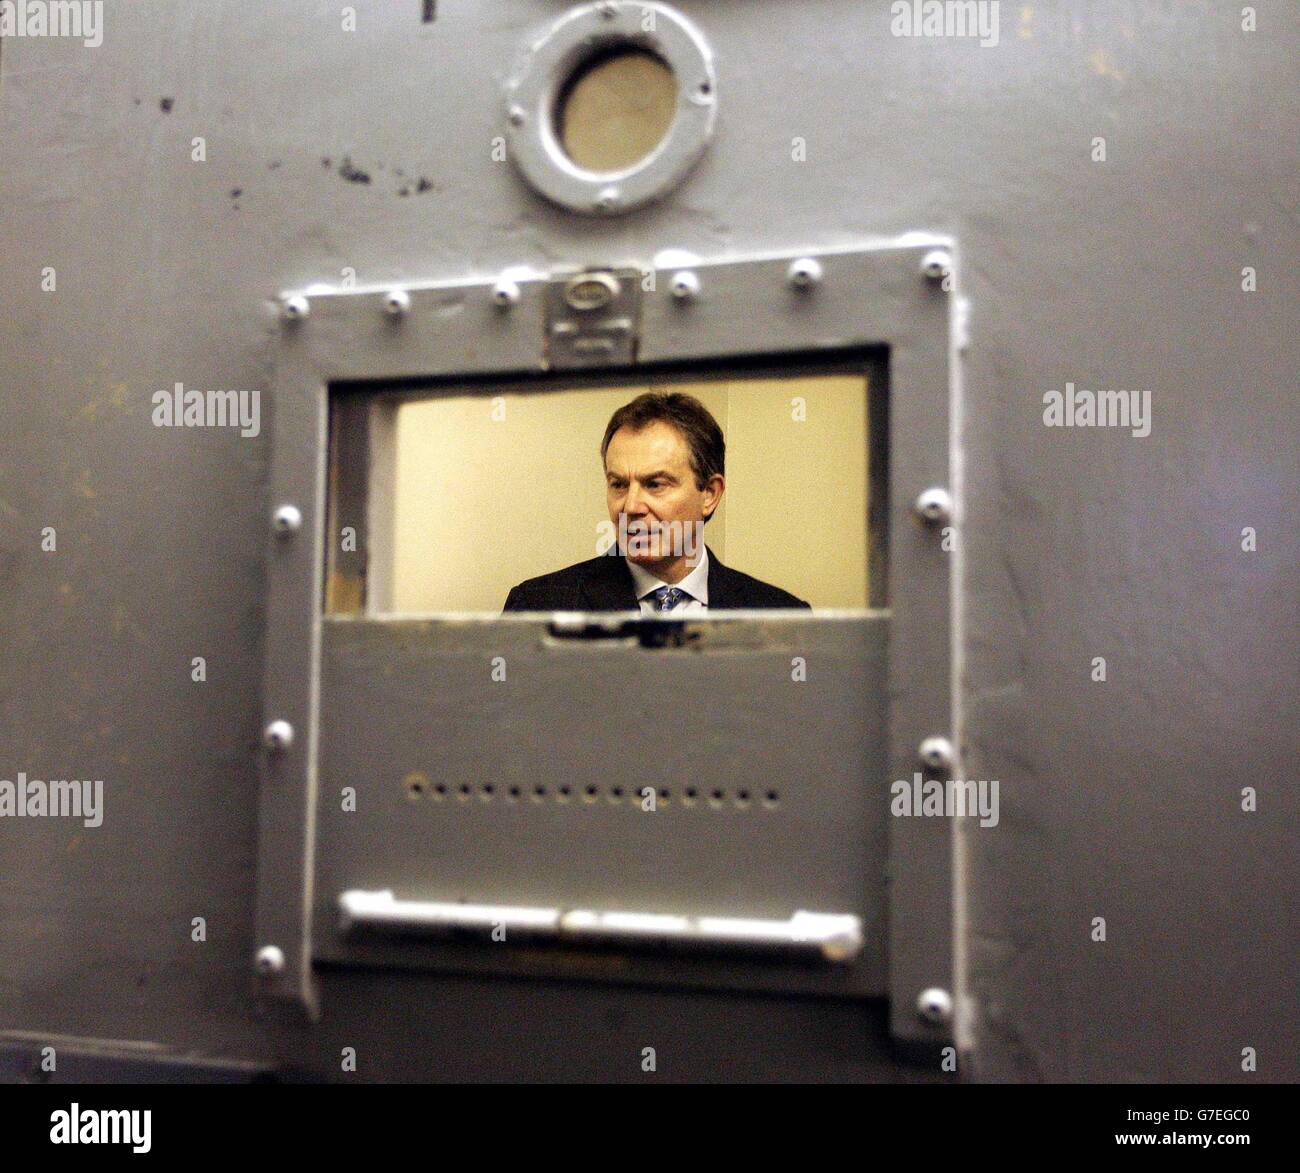 Britain's Prime Minister Tony Blair stands in a cell during a visit to Slough police station near London. Mr Blair and the Home Secretary David Blunkett arrived in the Berkshire town on the 2.18 from Paddington before being driven to the police base to be shown around by Superintendent Brian Langston, area commander for Slough. The Prime Minister endorsed a series of law changes aimed at rebalancing the judicial system in favour of law-abiding citizens and victims of crime rather than the offenders themselves. Stock Photo